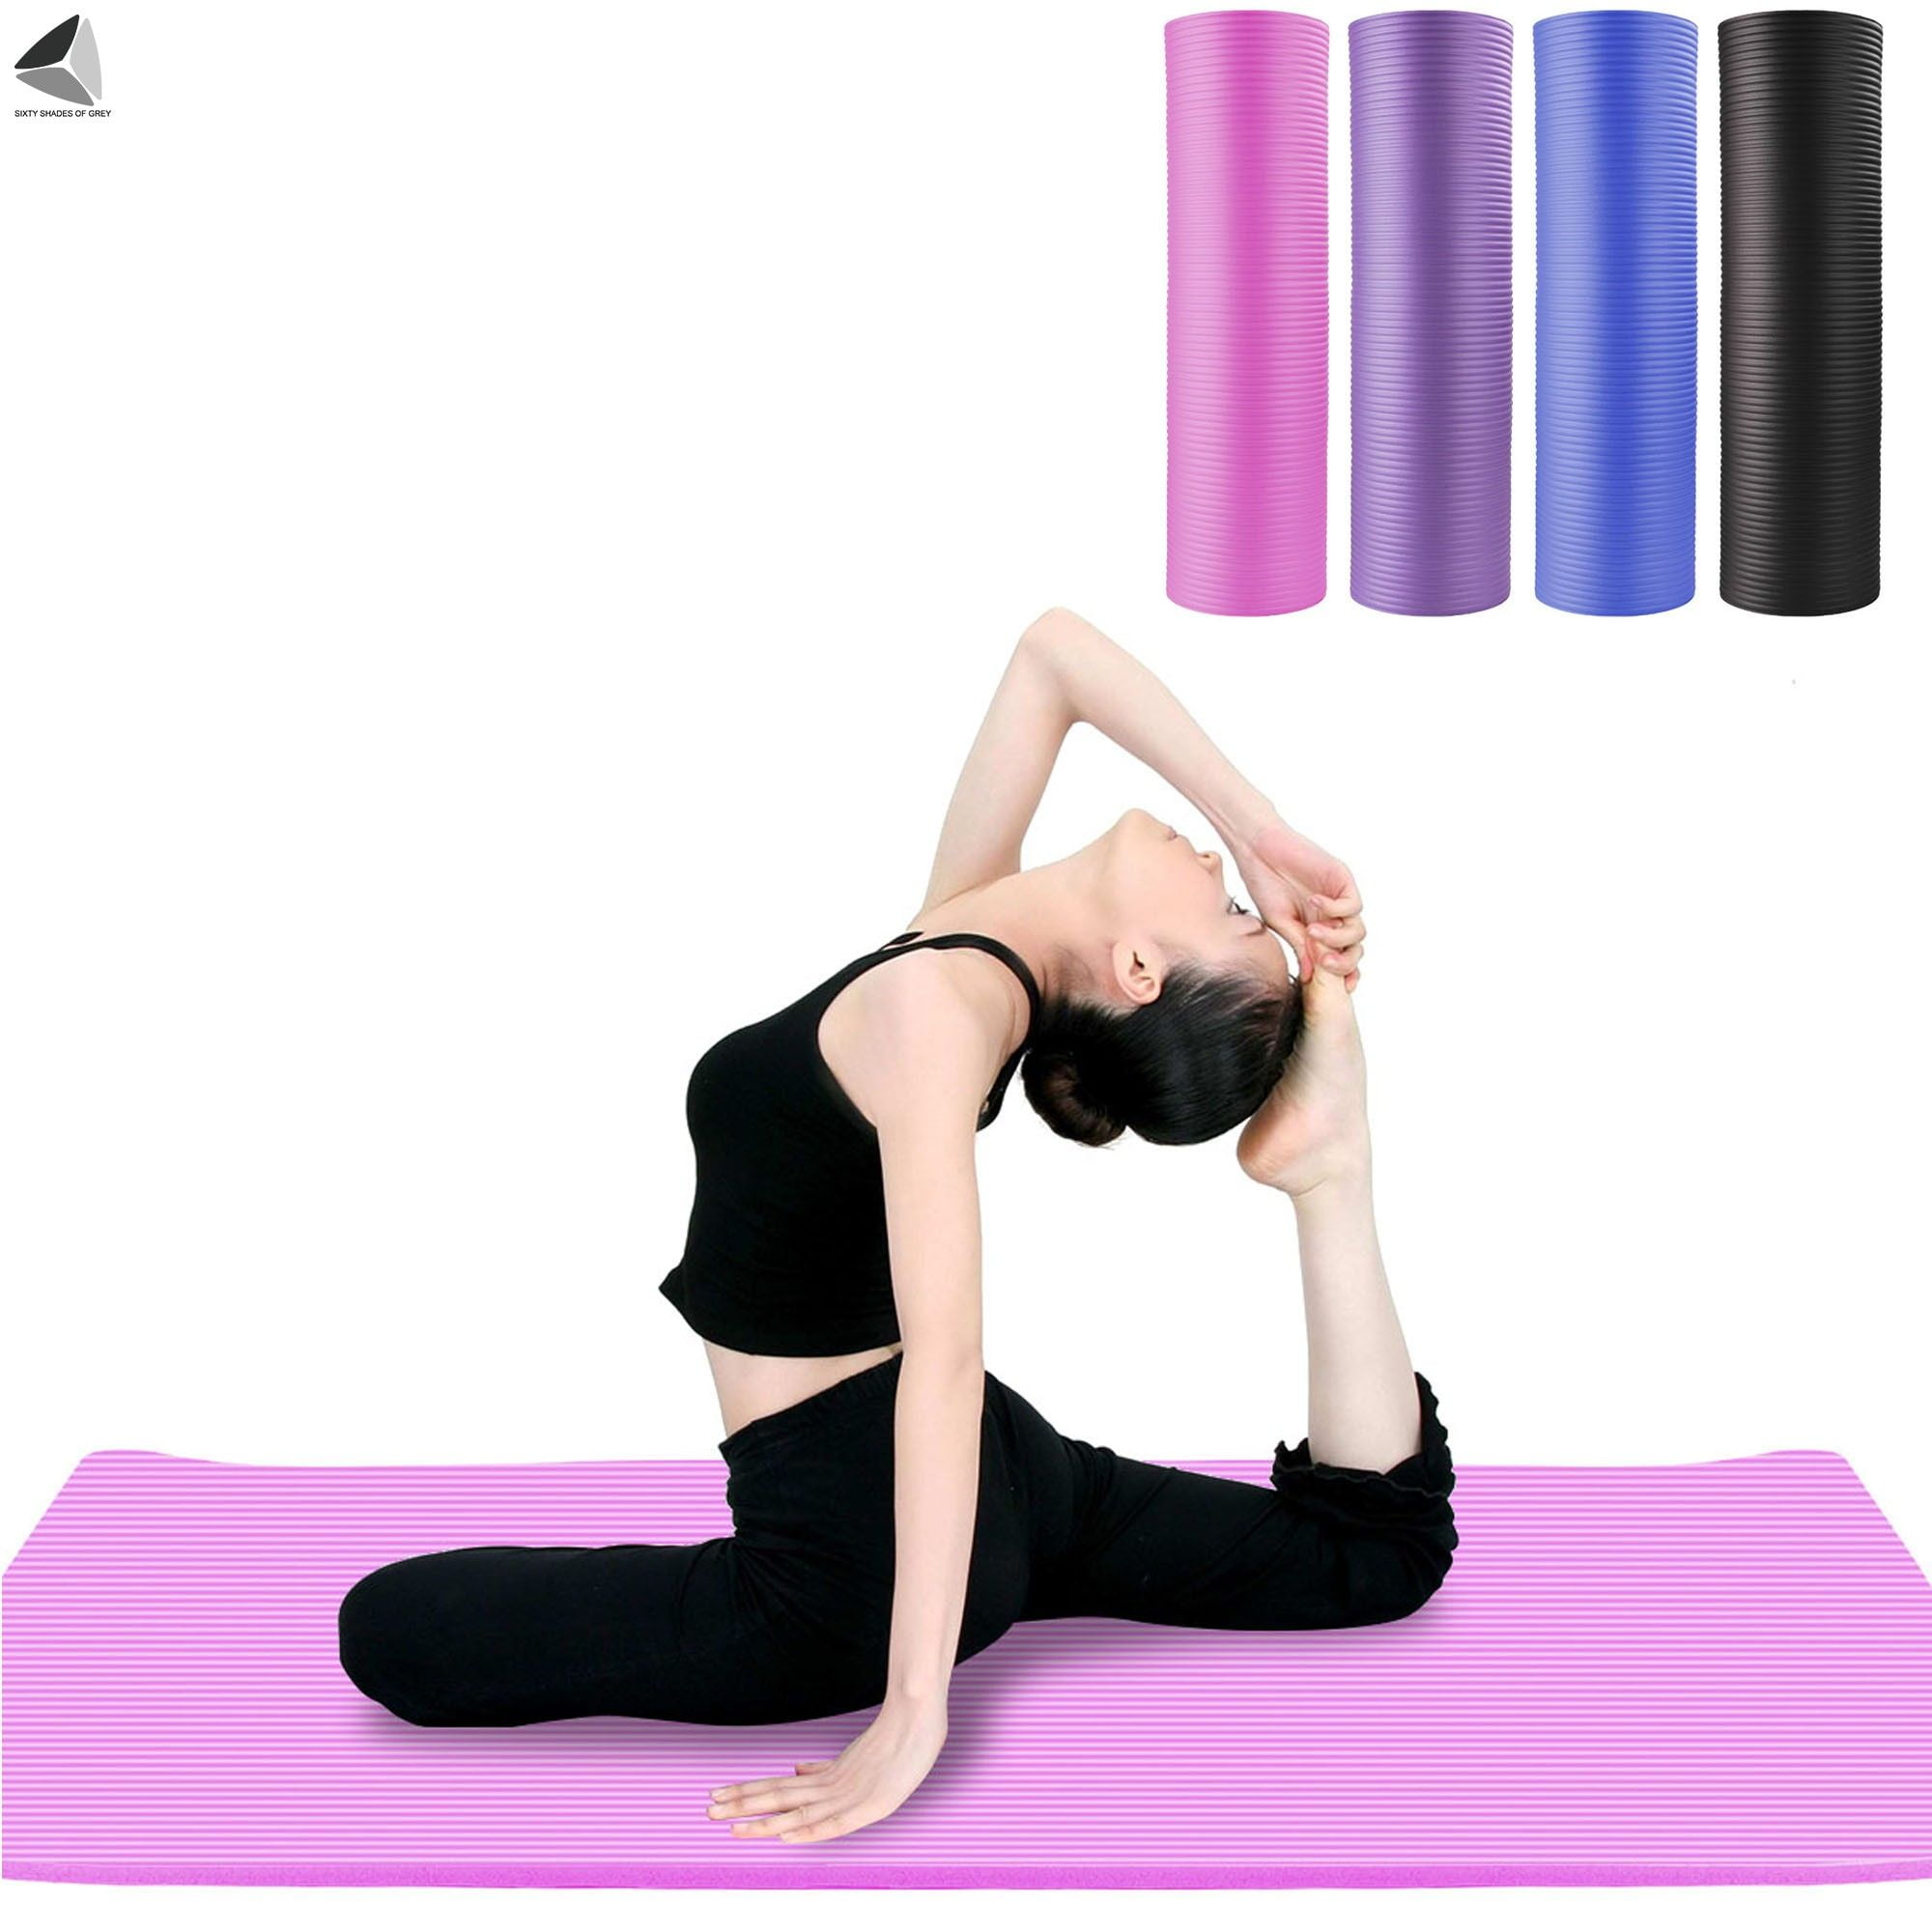 Details about   Fitness Yoga Mat Gym Exercise/ Mats Workout Pilates Fitness Mat free shiping 